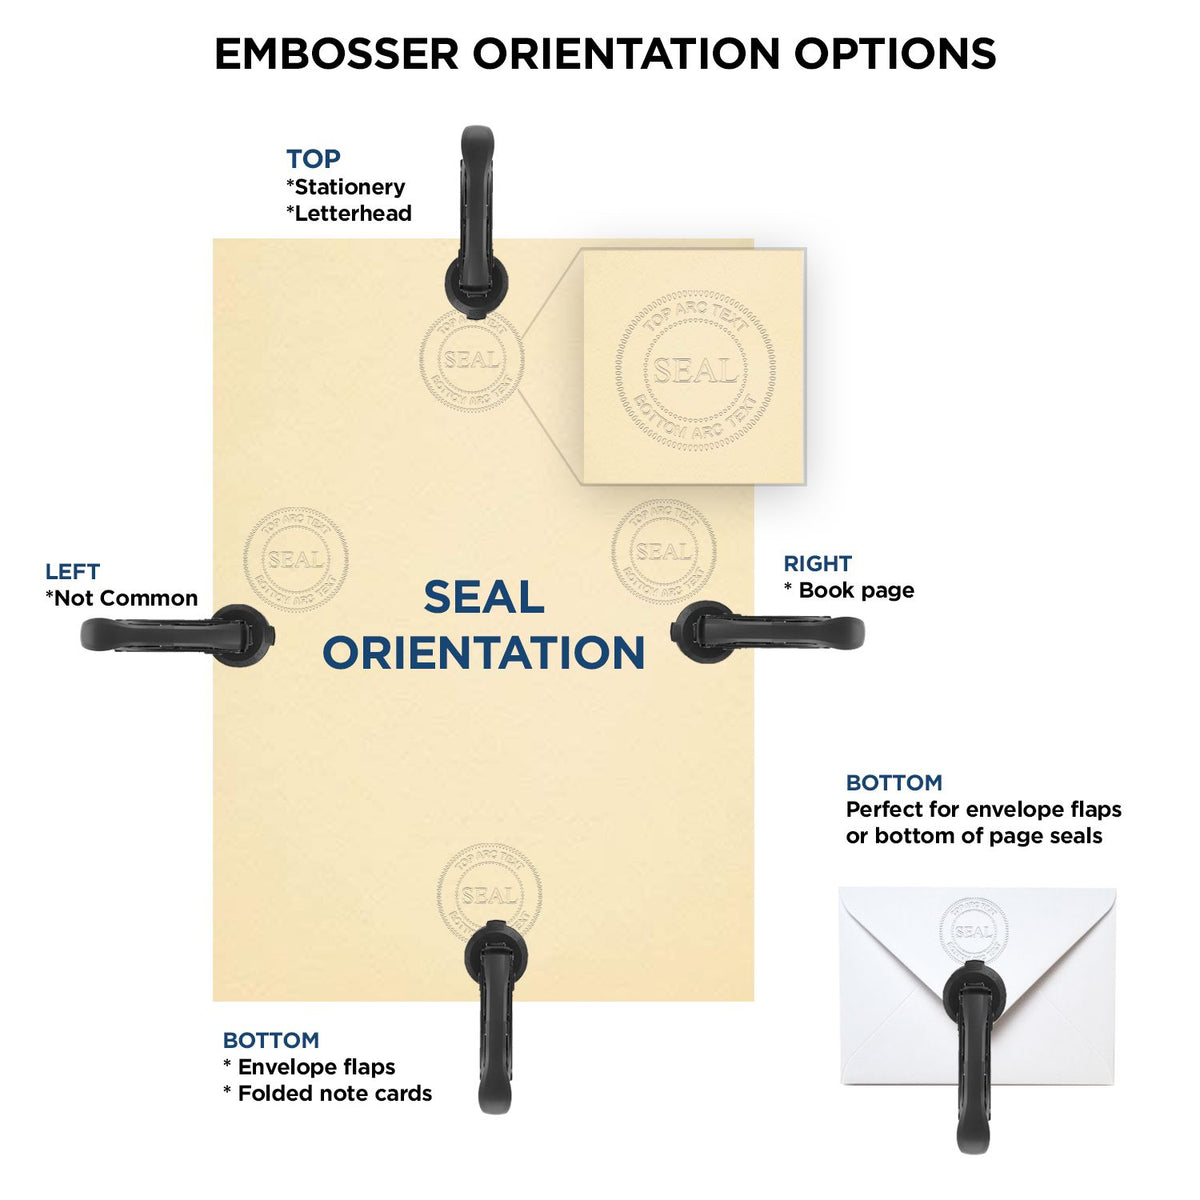 An infographic for the Heavy Duty Cast Iron Arkansas Land Surveyor Seal Embosser showing embosser orientation, this is showing examples of a top, bottom, right and left insert.